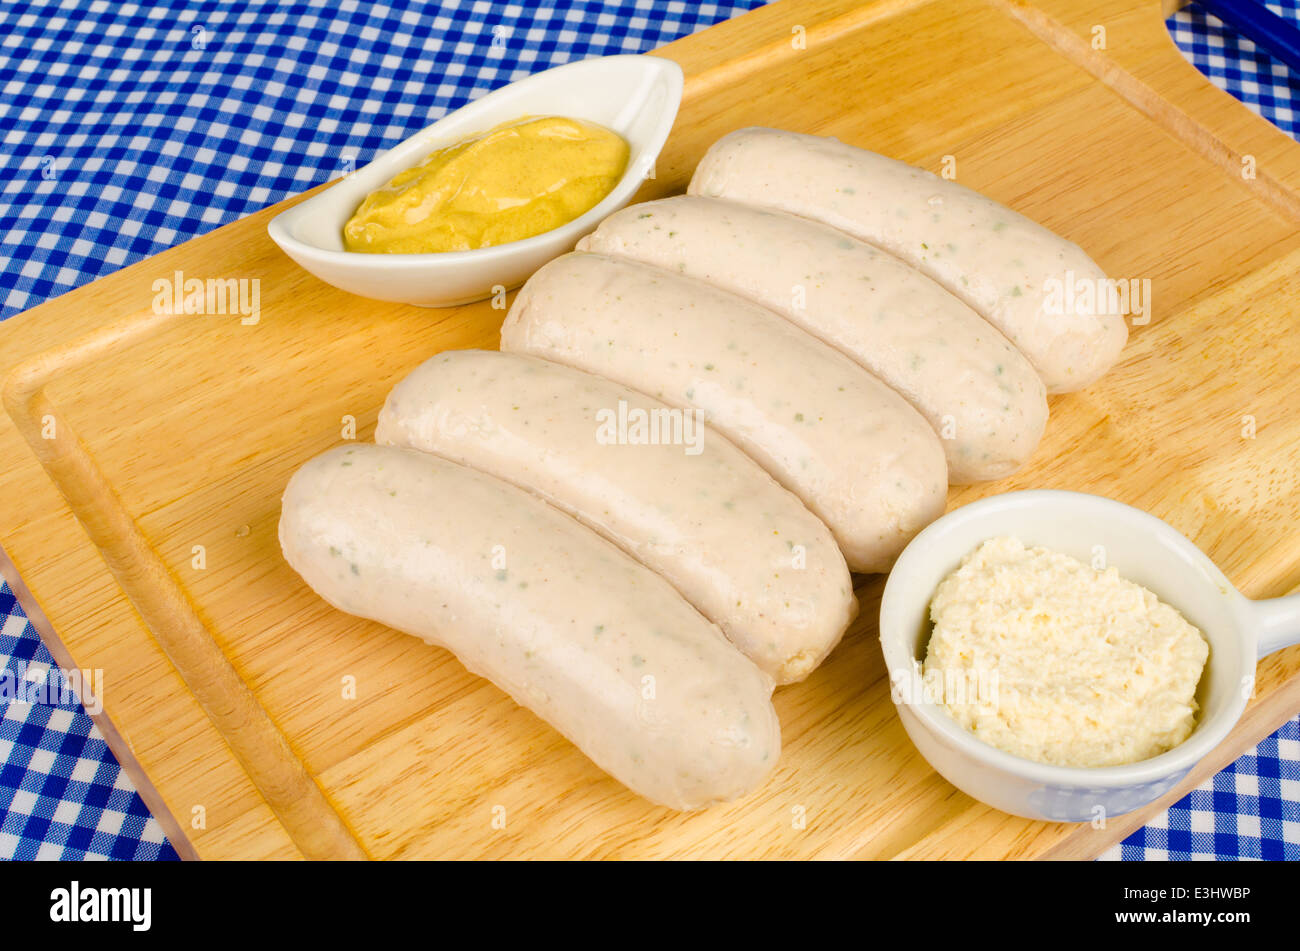 German Bratwurst sausages with mustard and horseradish, traditional food Stock Photo